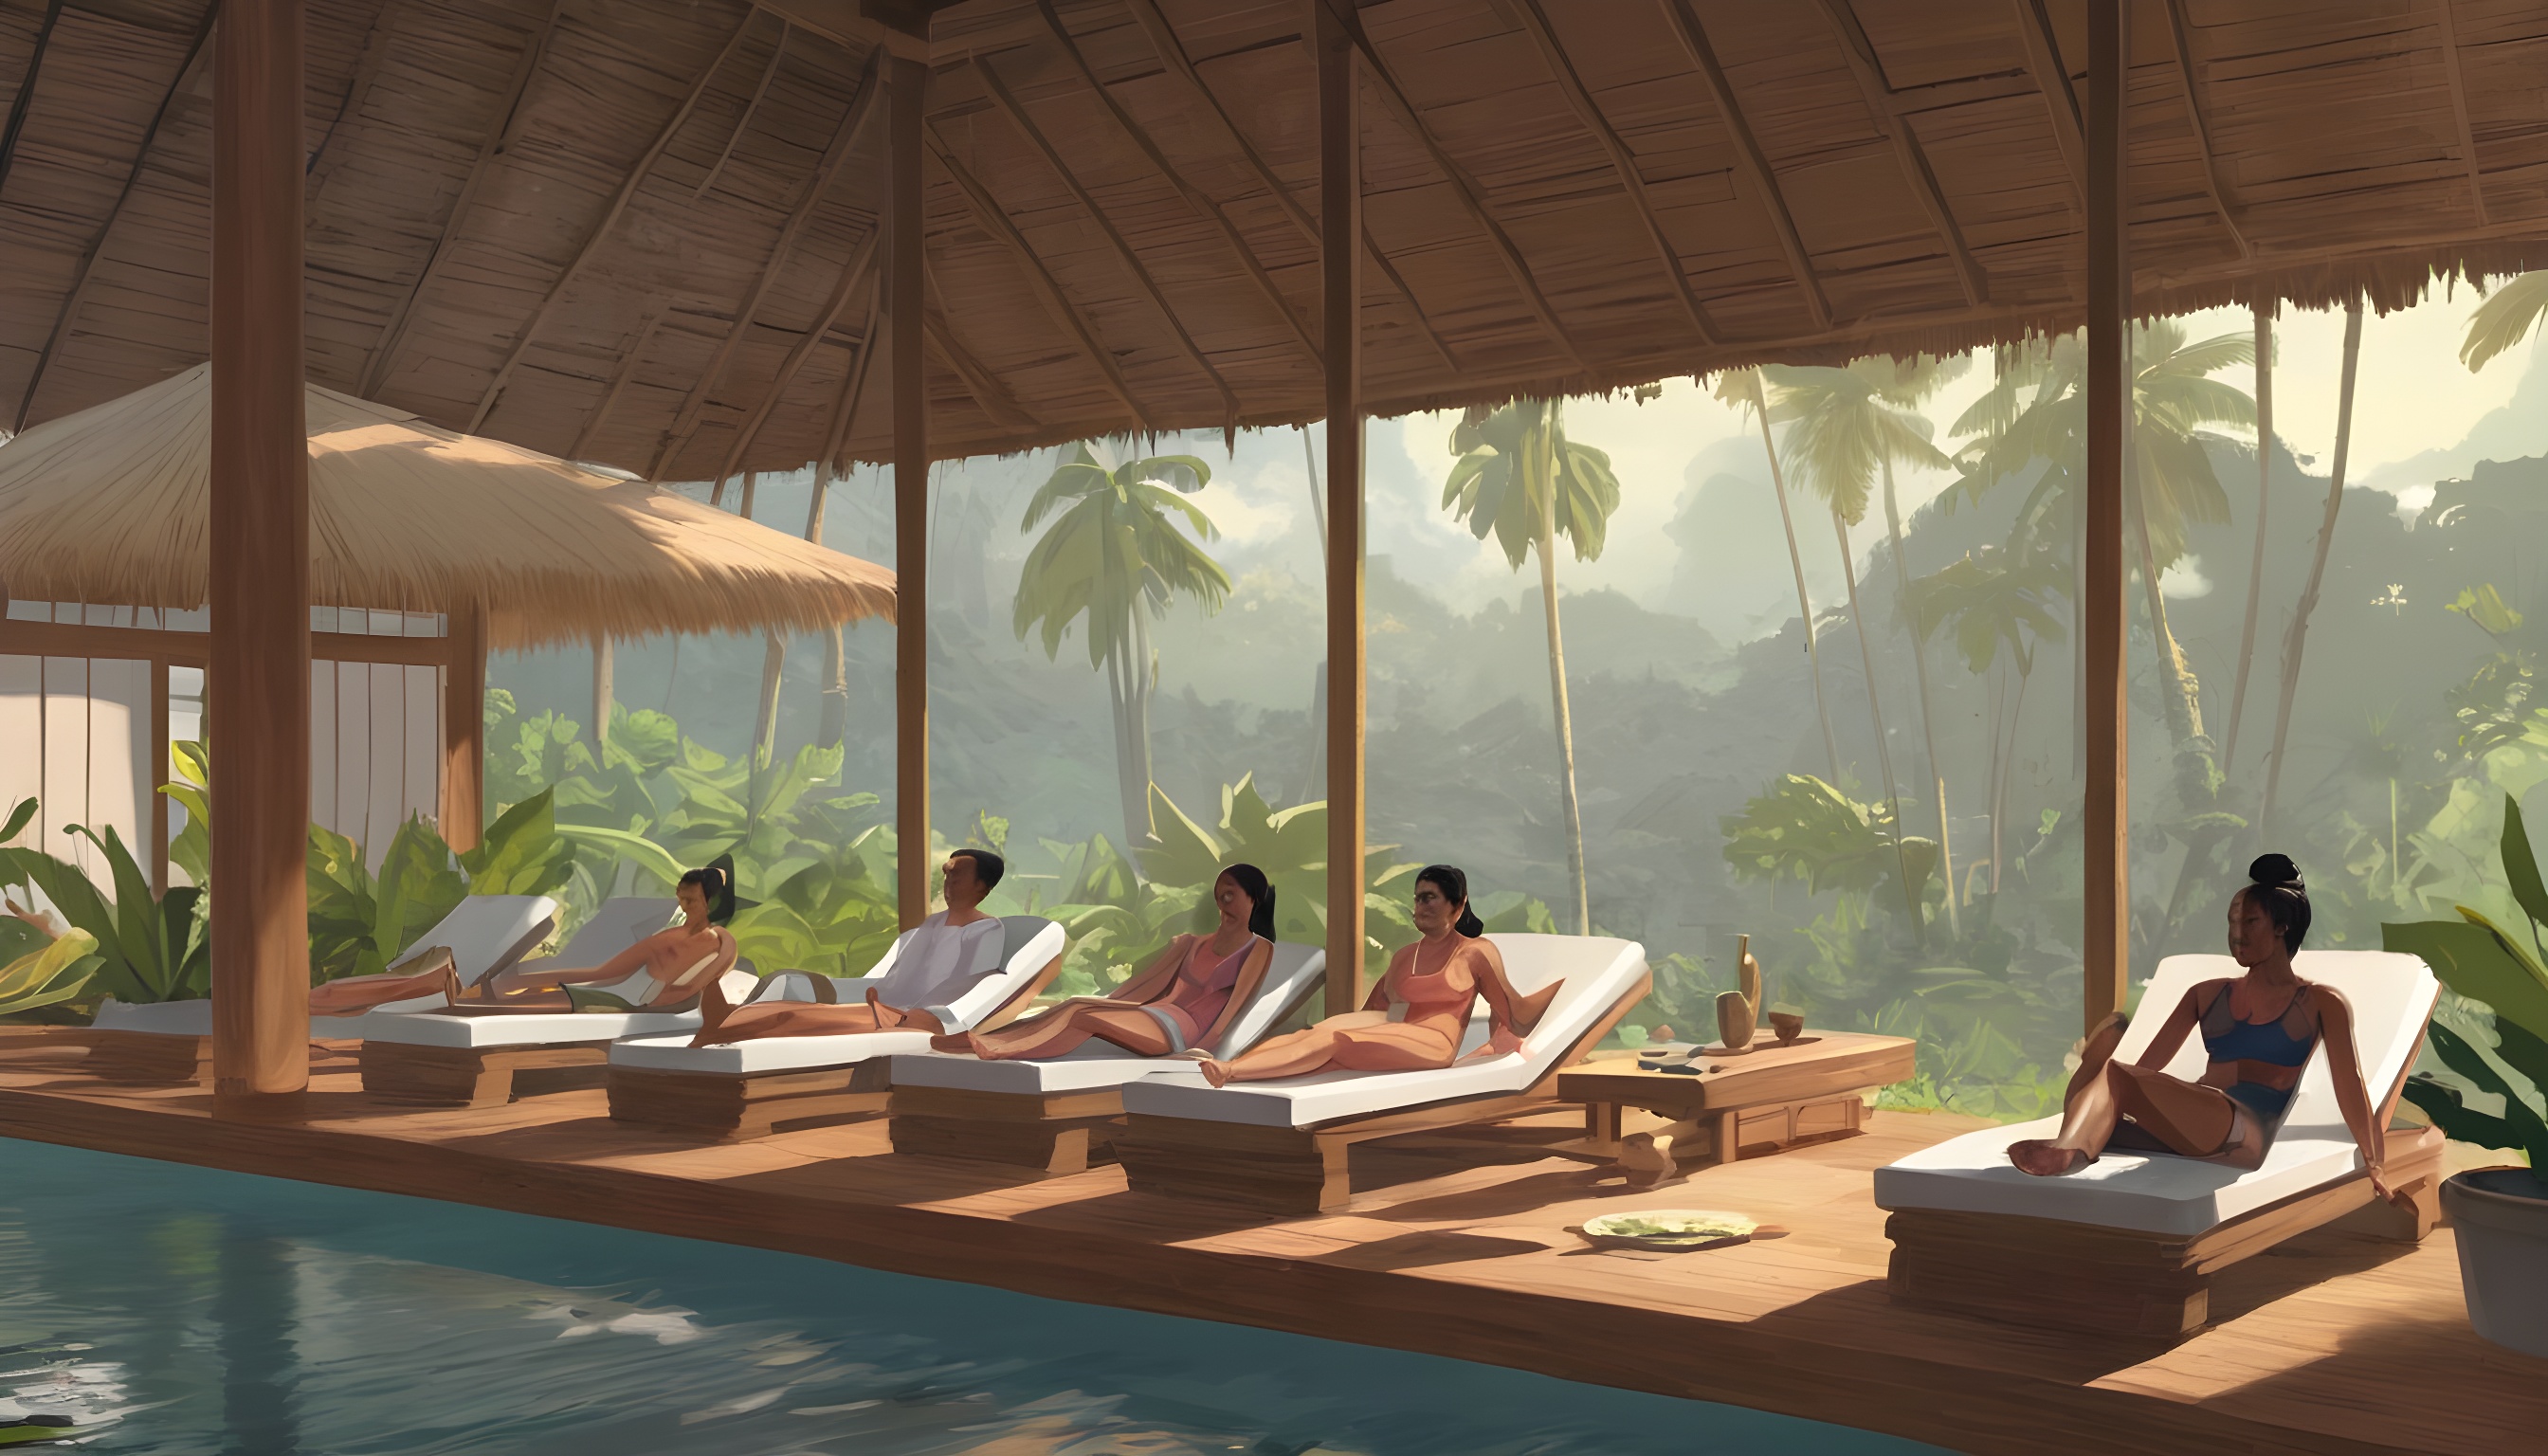 Embark on a journey to wellness at Rimba Events - Your sanctuary for holistic wellness events in Bali